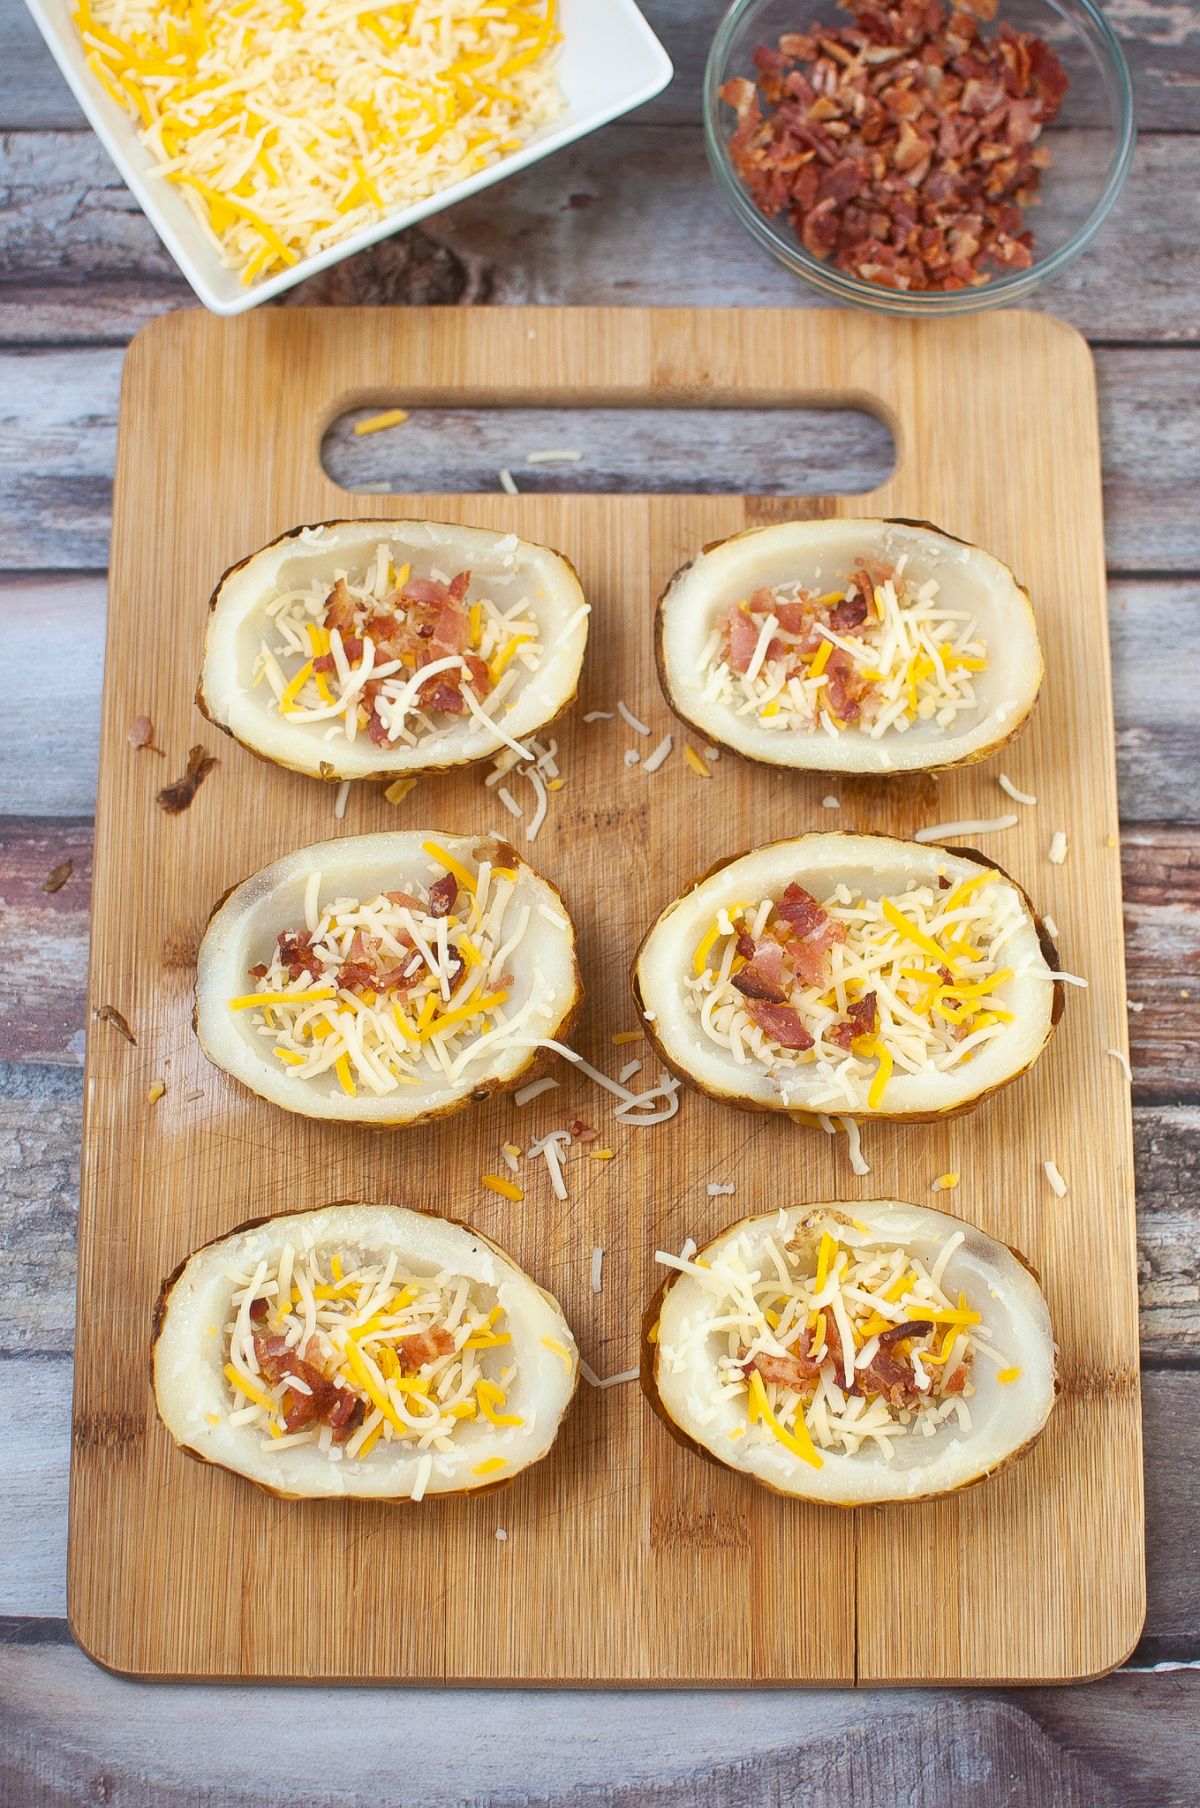 baked potato halves Topped with bacon, cheese, and spices with more bacon and cheese in the background